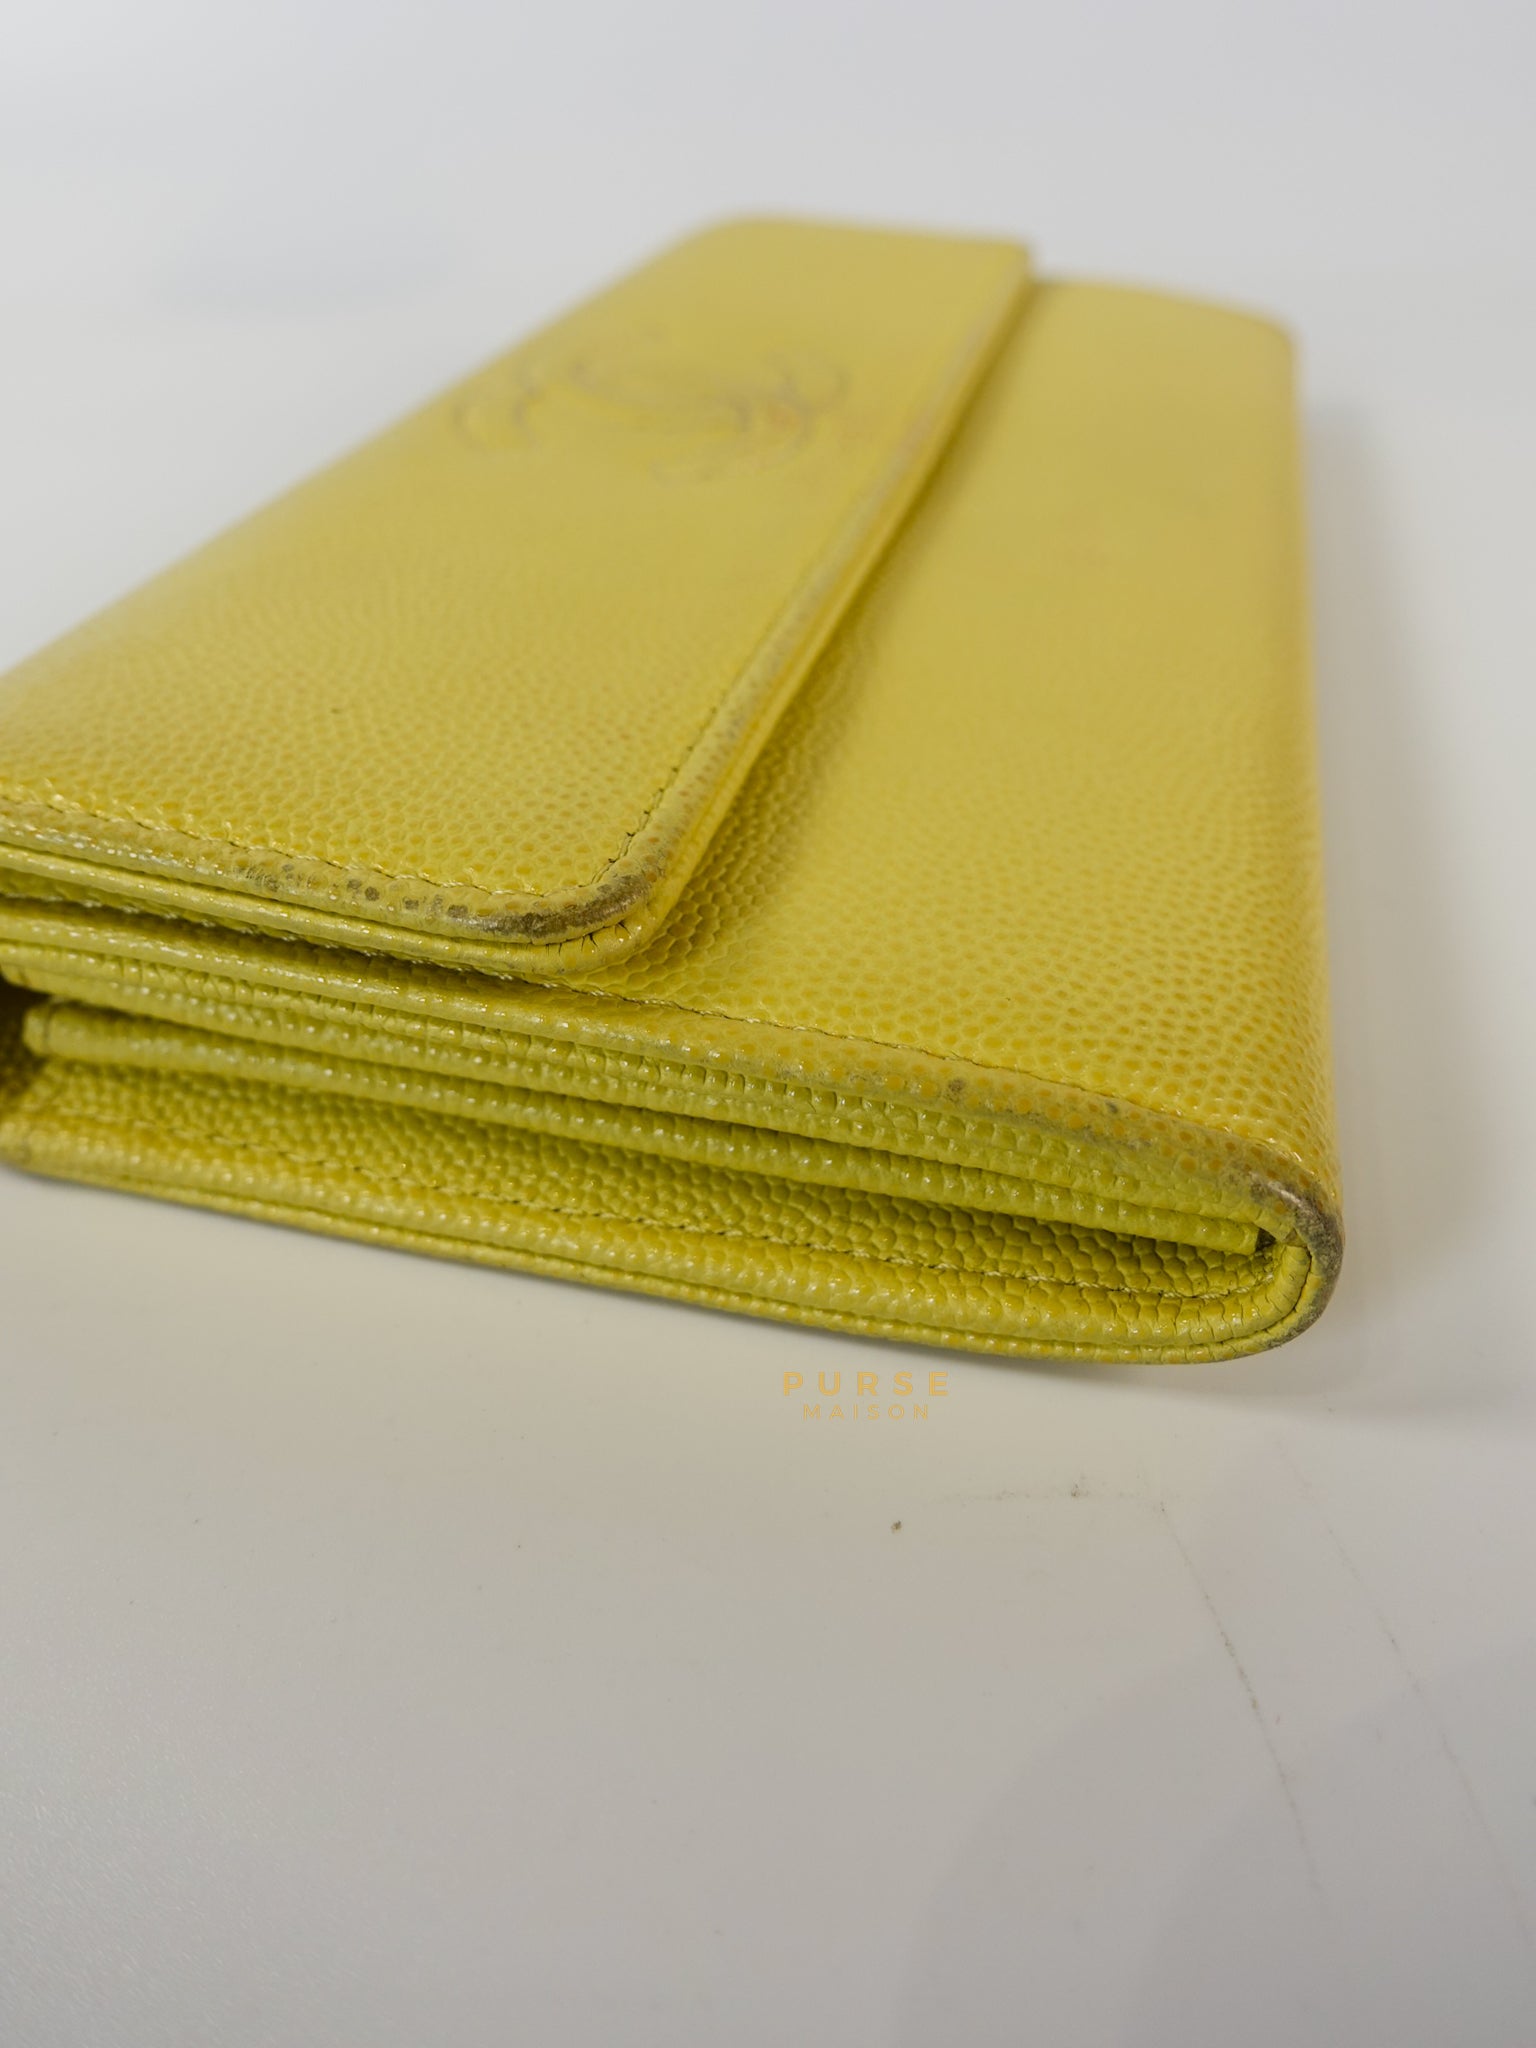 Coco Mark Long Wallet in Light Yellow Caviar Leather Series 24 | Purse Maison Luxury Bags Shop